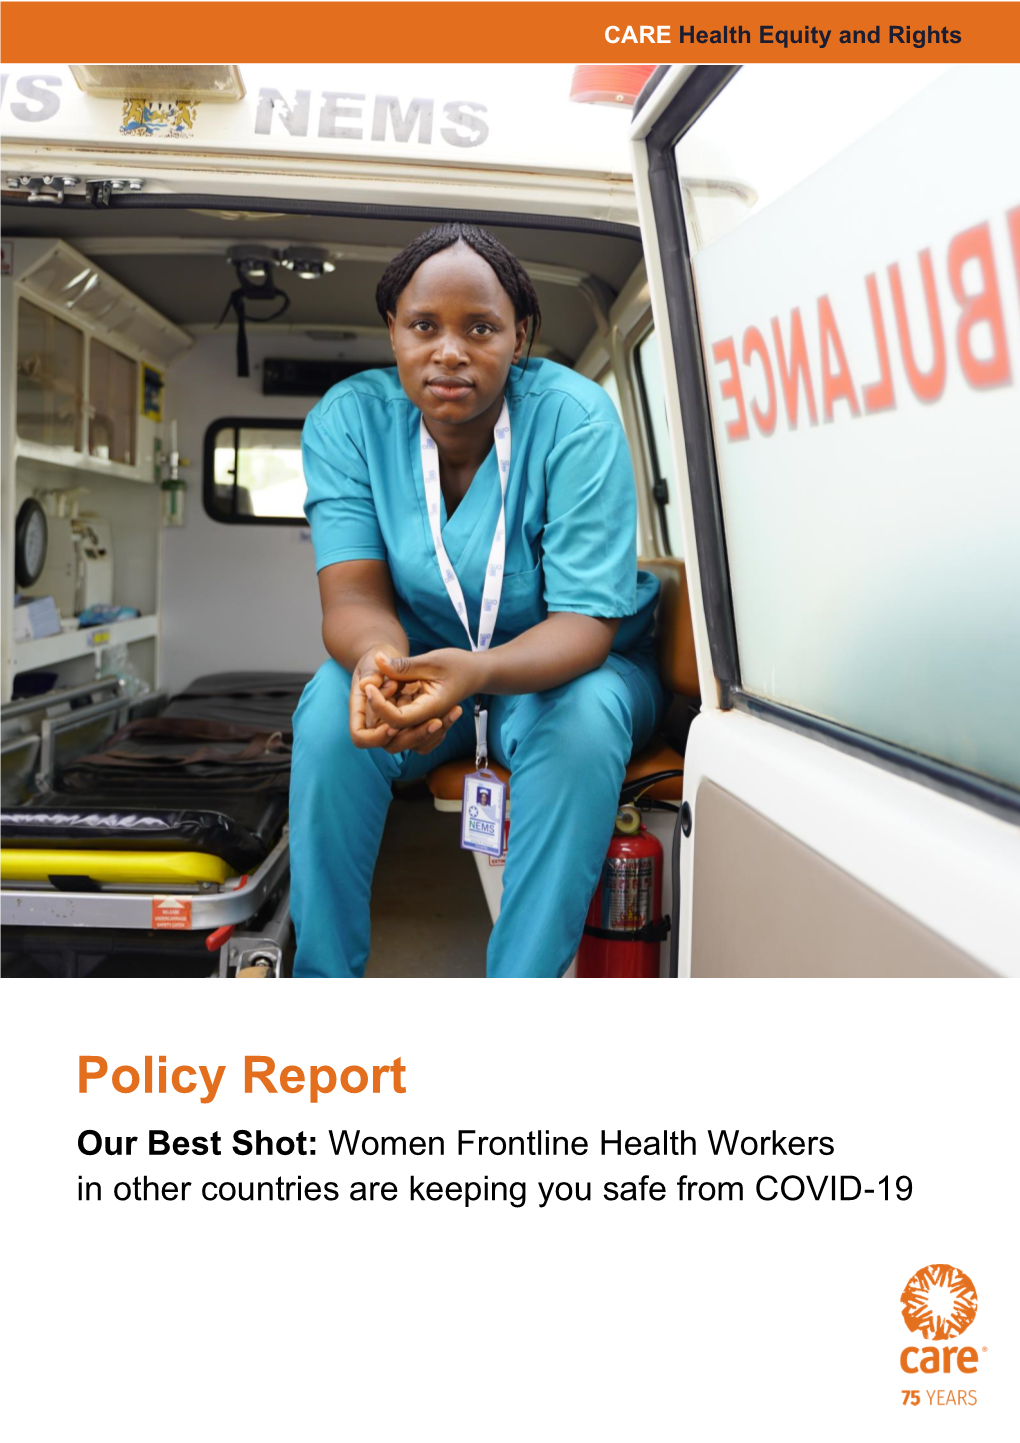 Our Best Shot: Women Frontline Health Workers in Other Countries Are Keeping You Safe from COVID-19